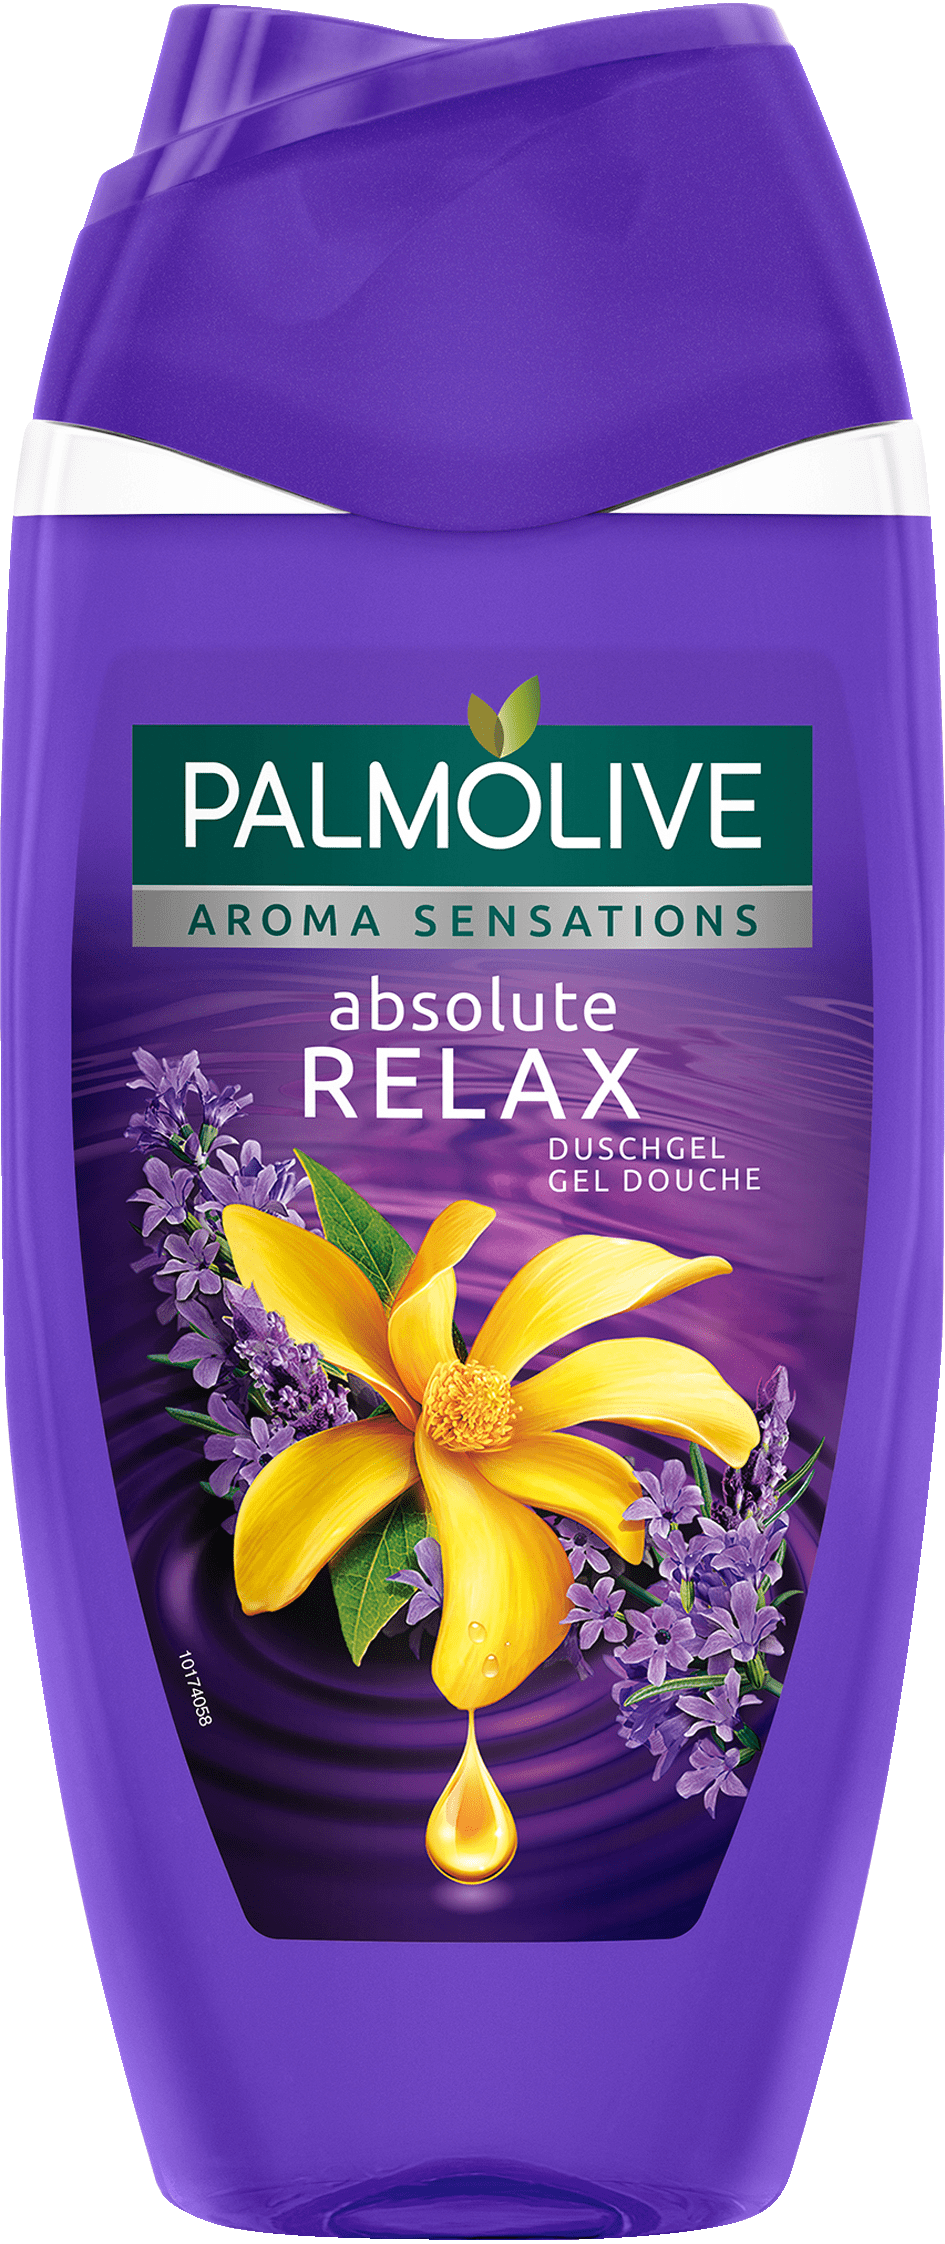 Palmolive Shower Gel Aroma Sensations Of Absolute Relax, 250 Ml